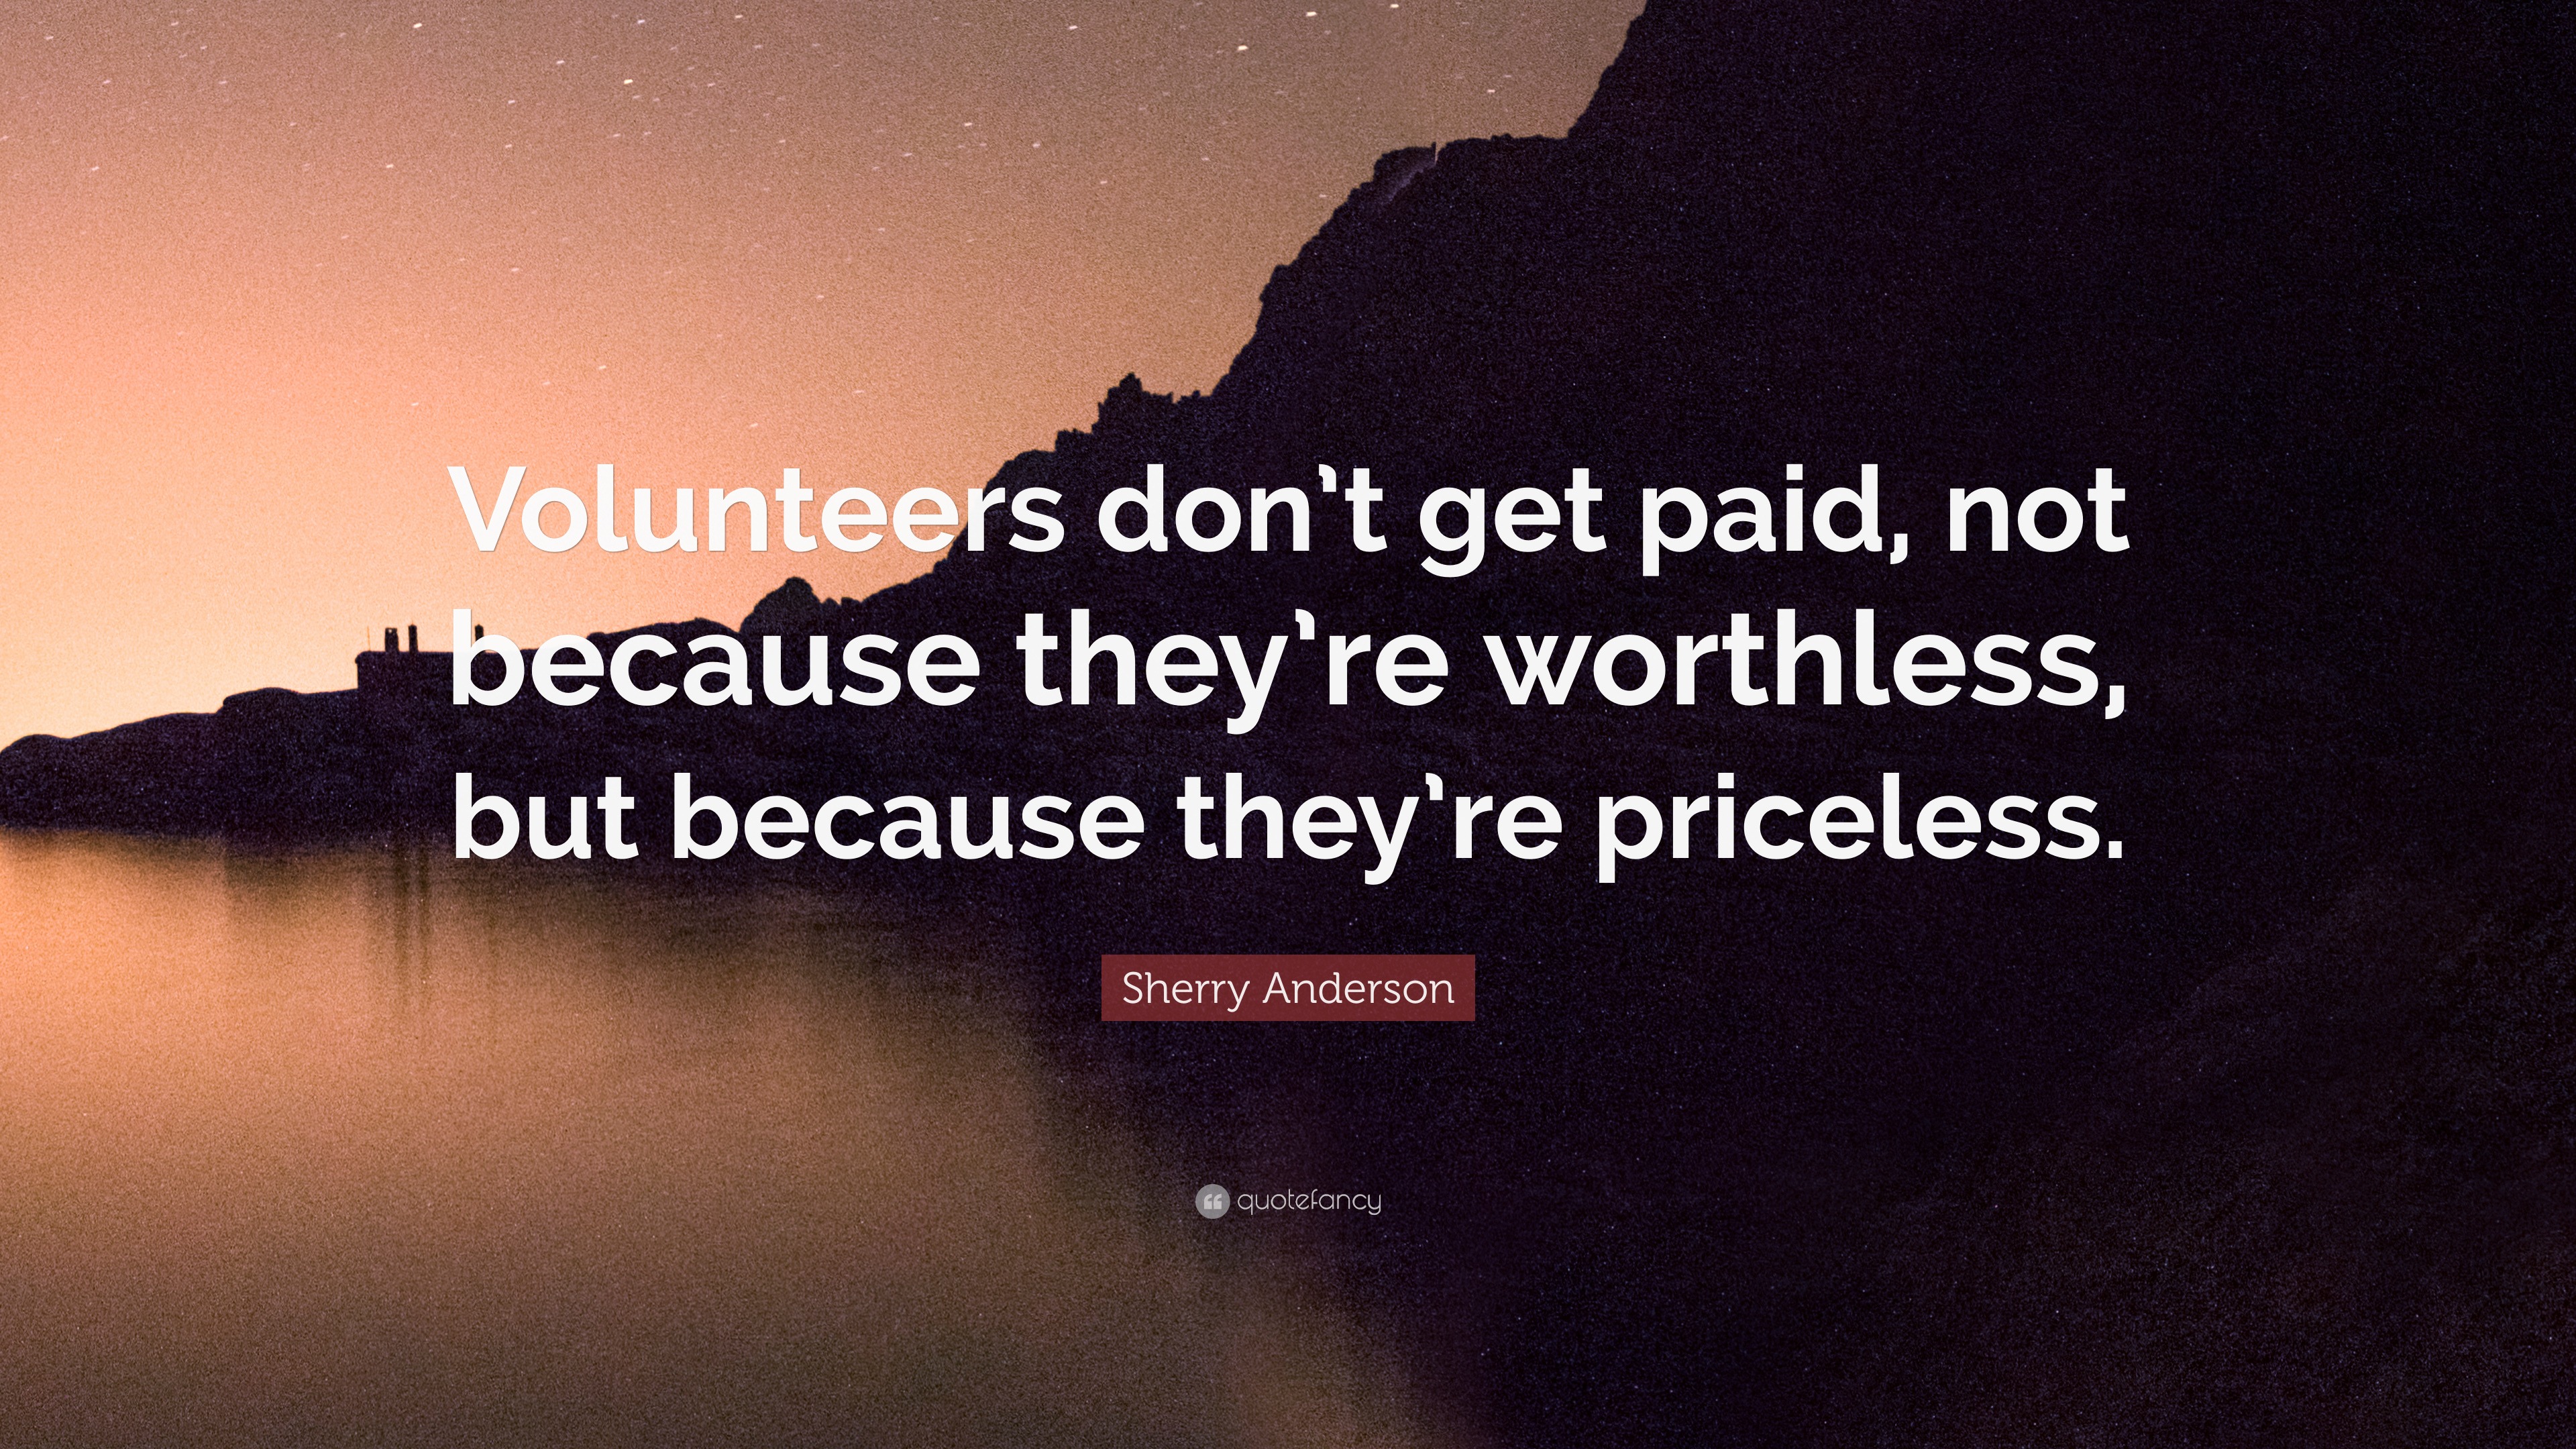 Sherry Anderson Quote: “Volunteers don’t get paid, not because they’re